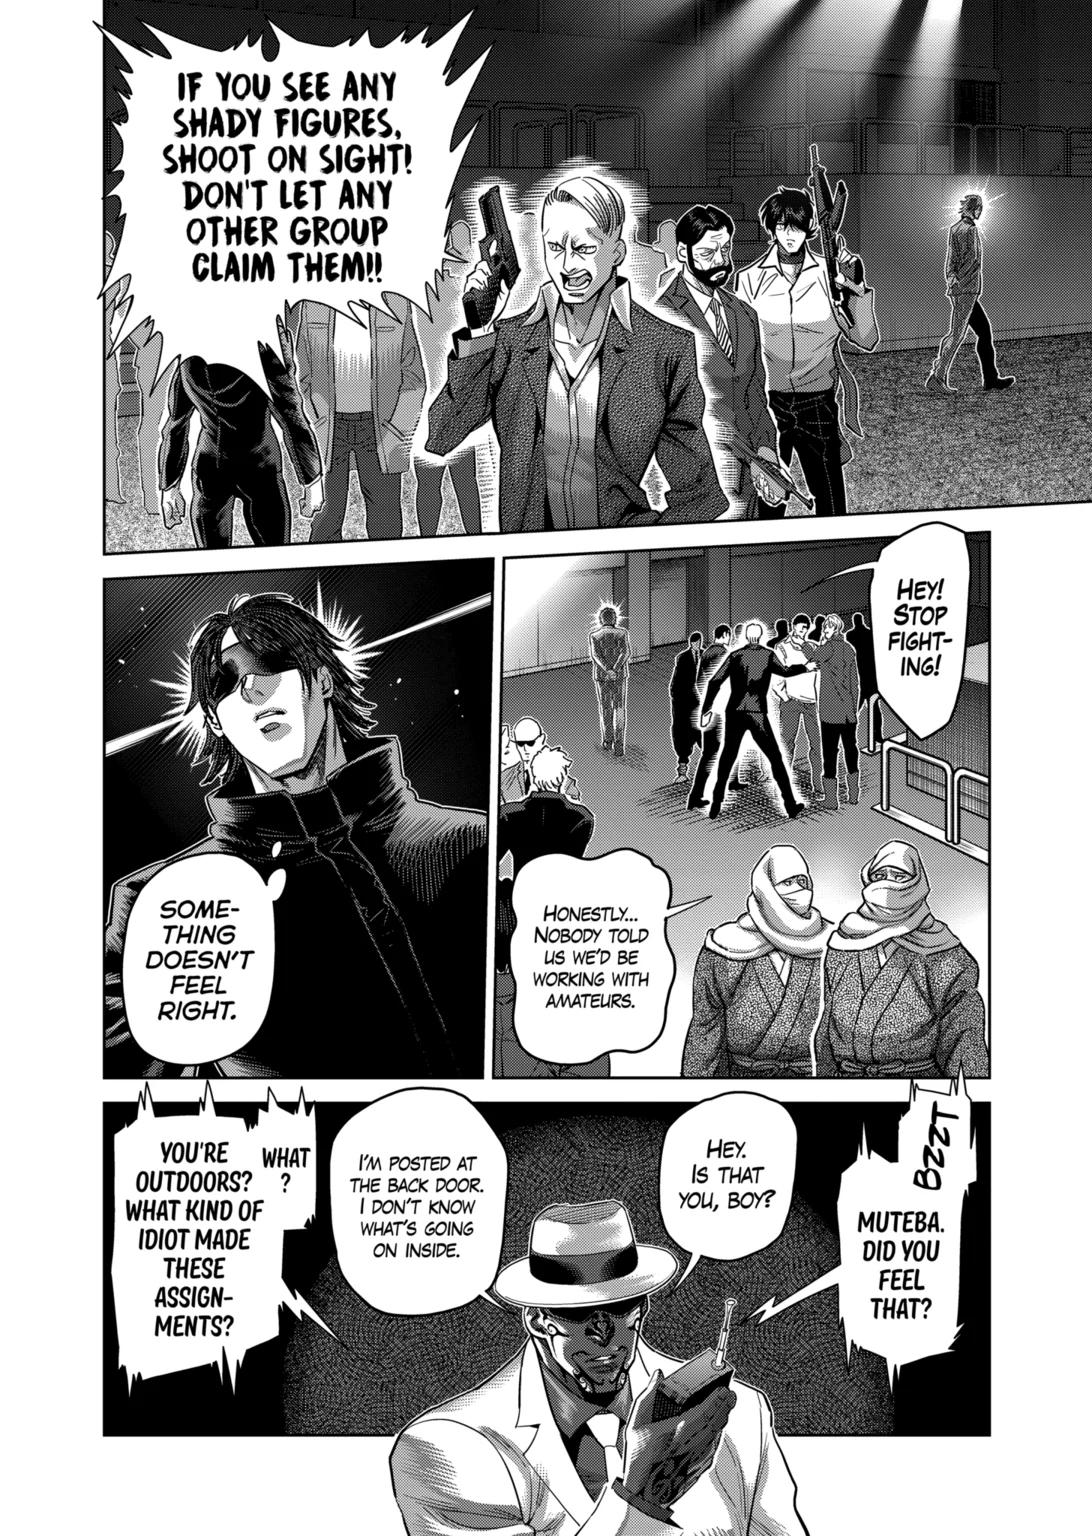 One Punch Man - Capítulo 232